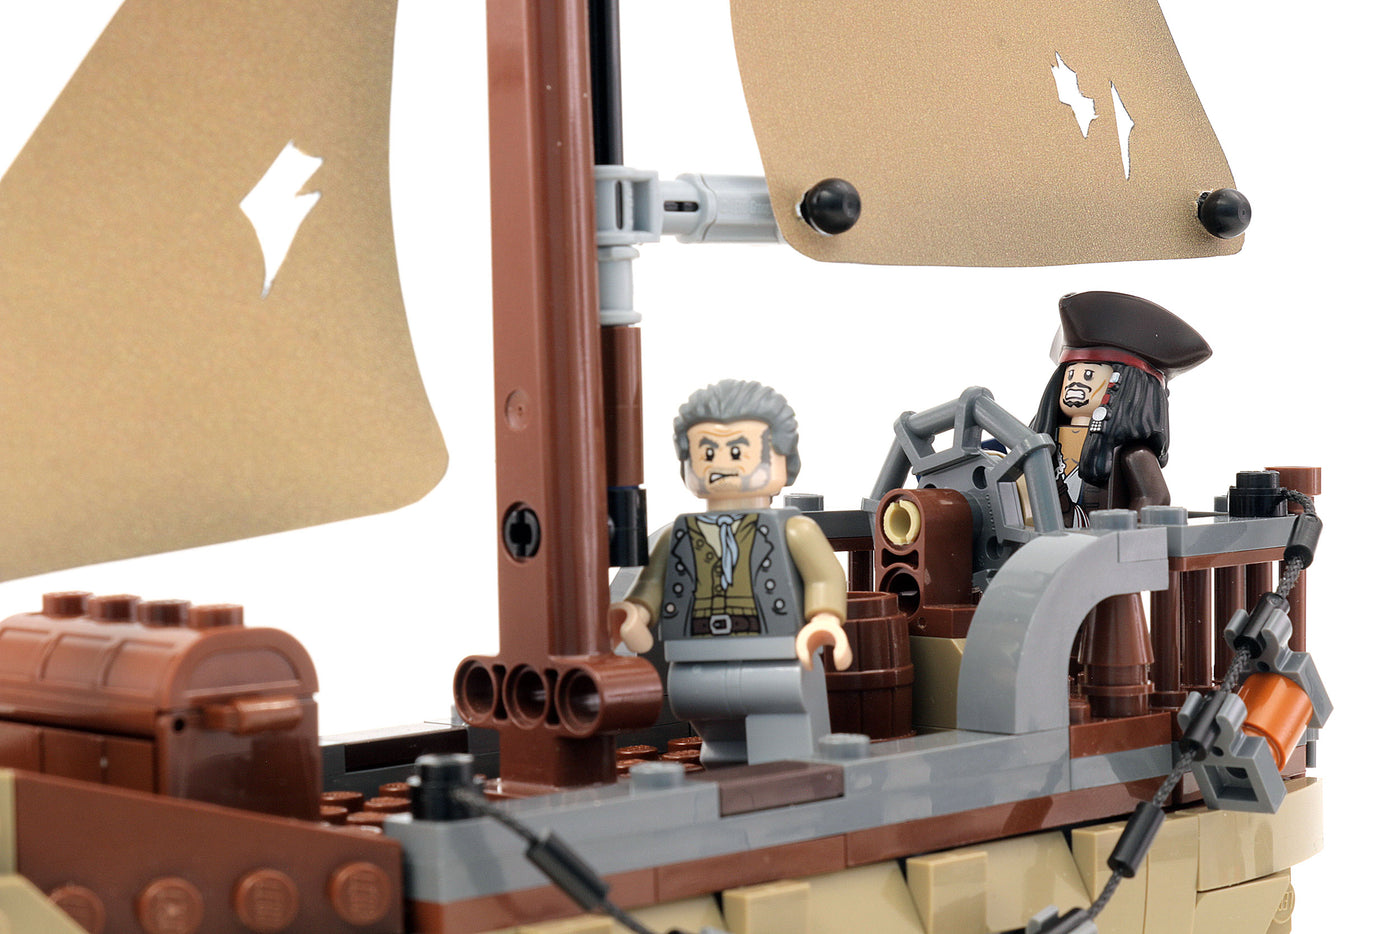 Instructions for Custom LEGO Pirates of the Caribbean The Dying Gull – B3  Customs